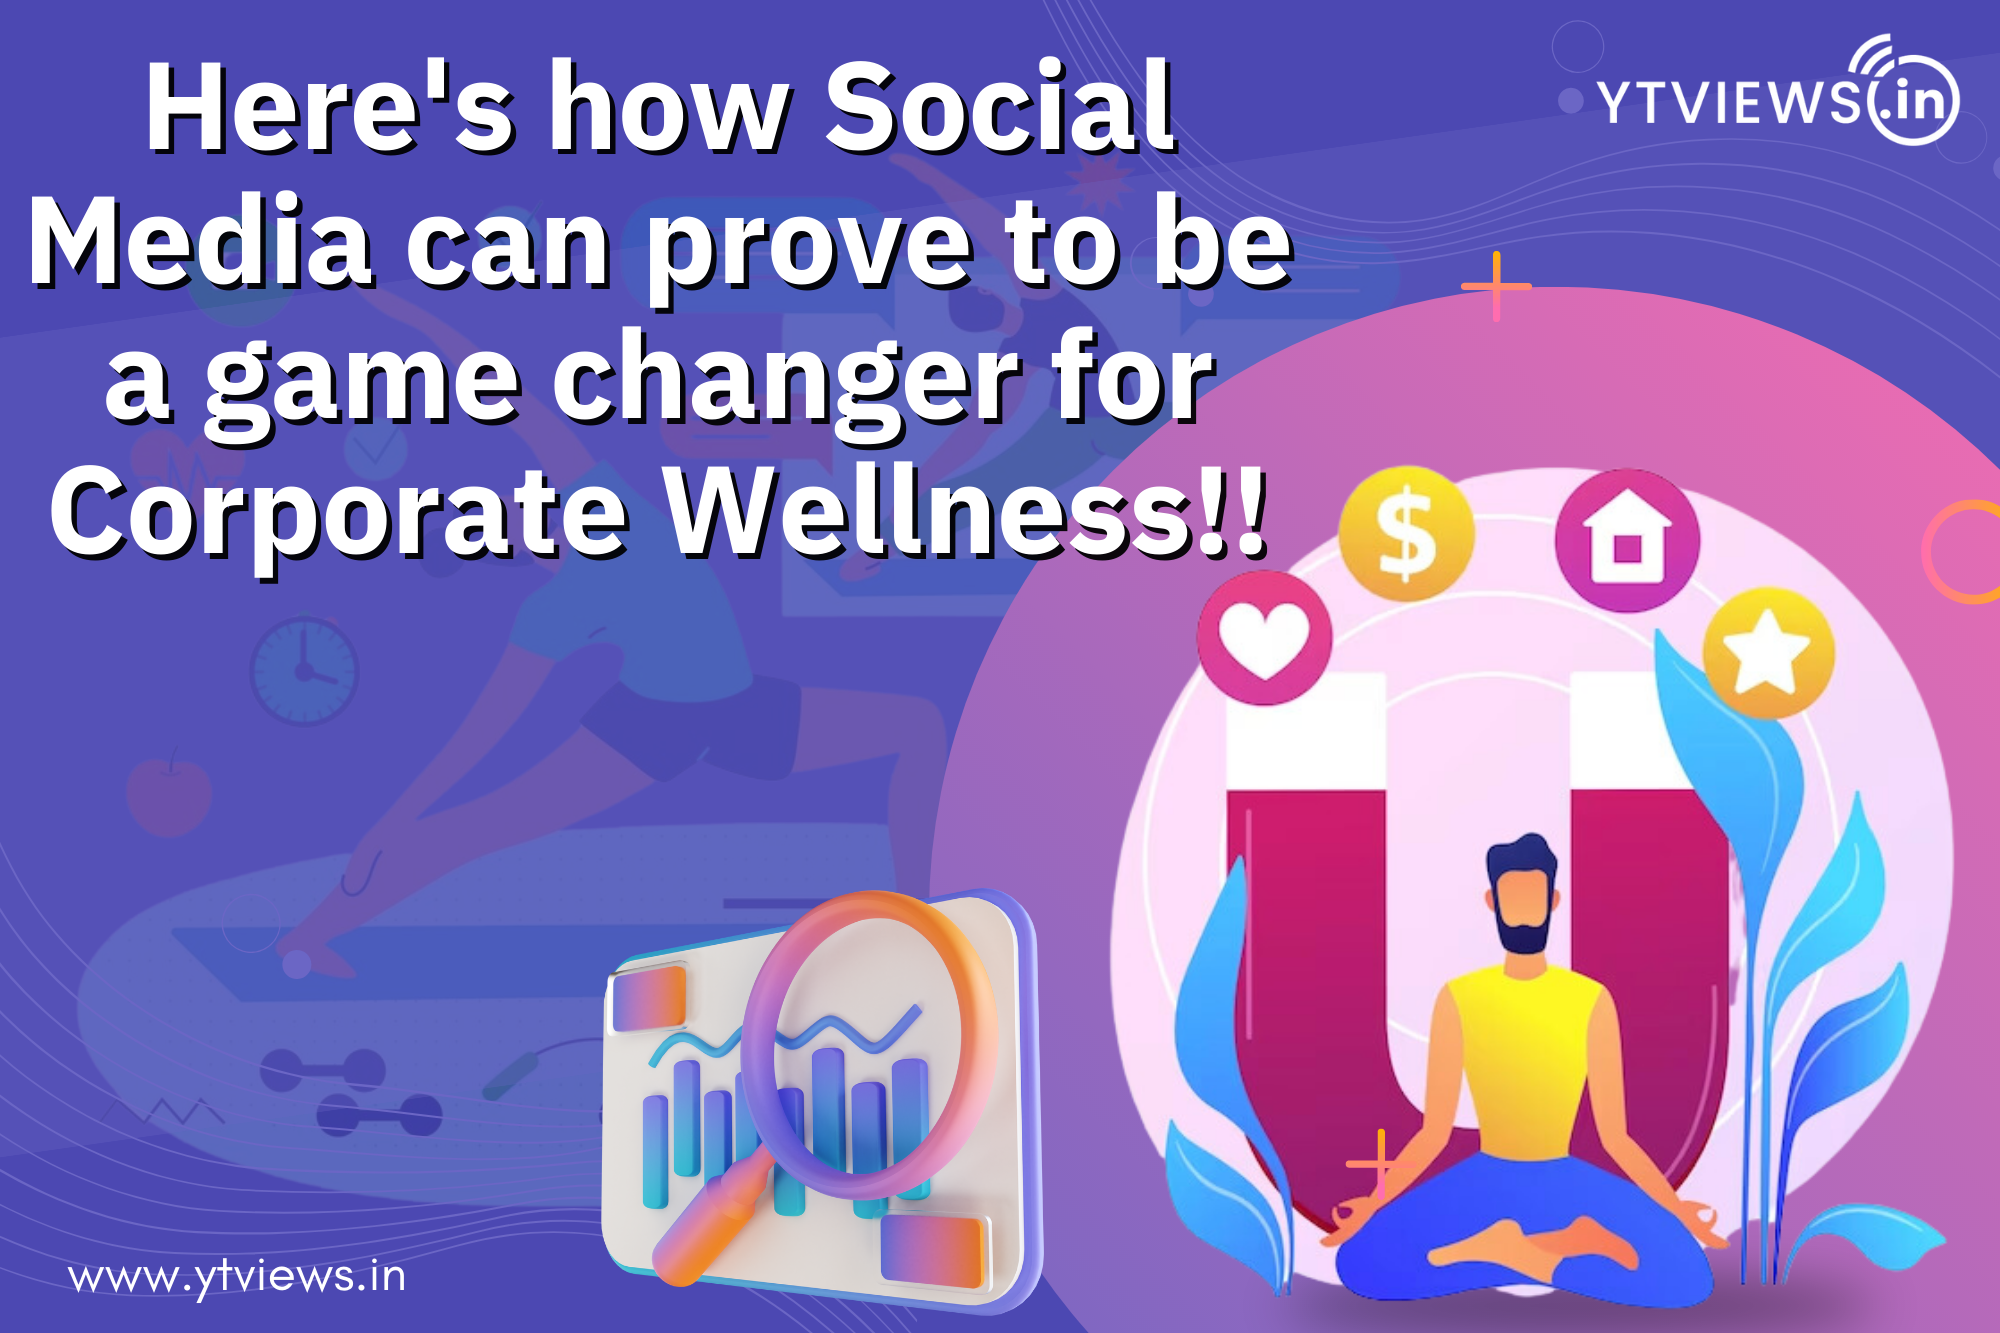 Here’s how Social Media can prove to be a game changer for corporate wellness